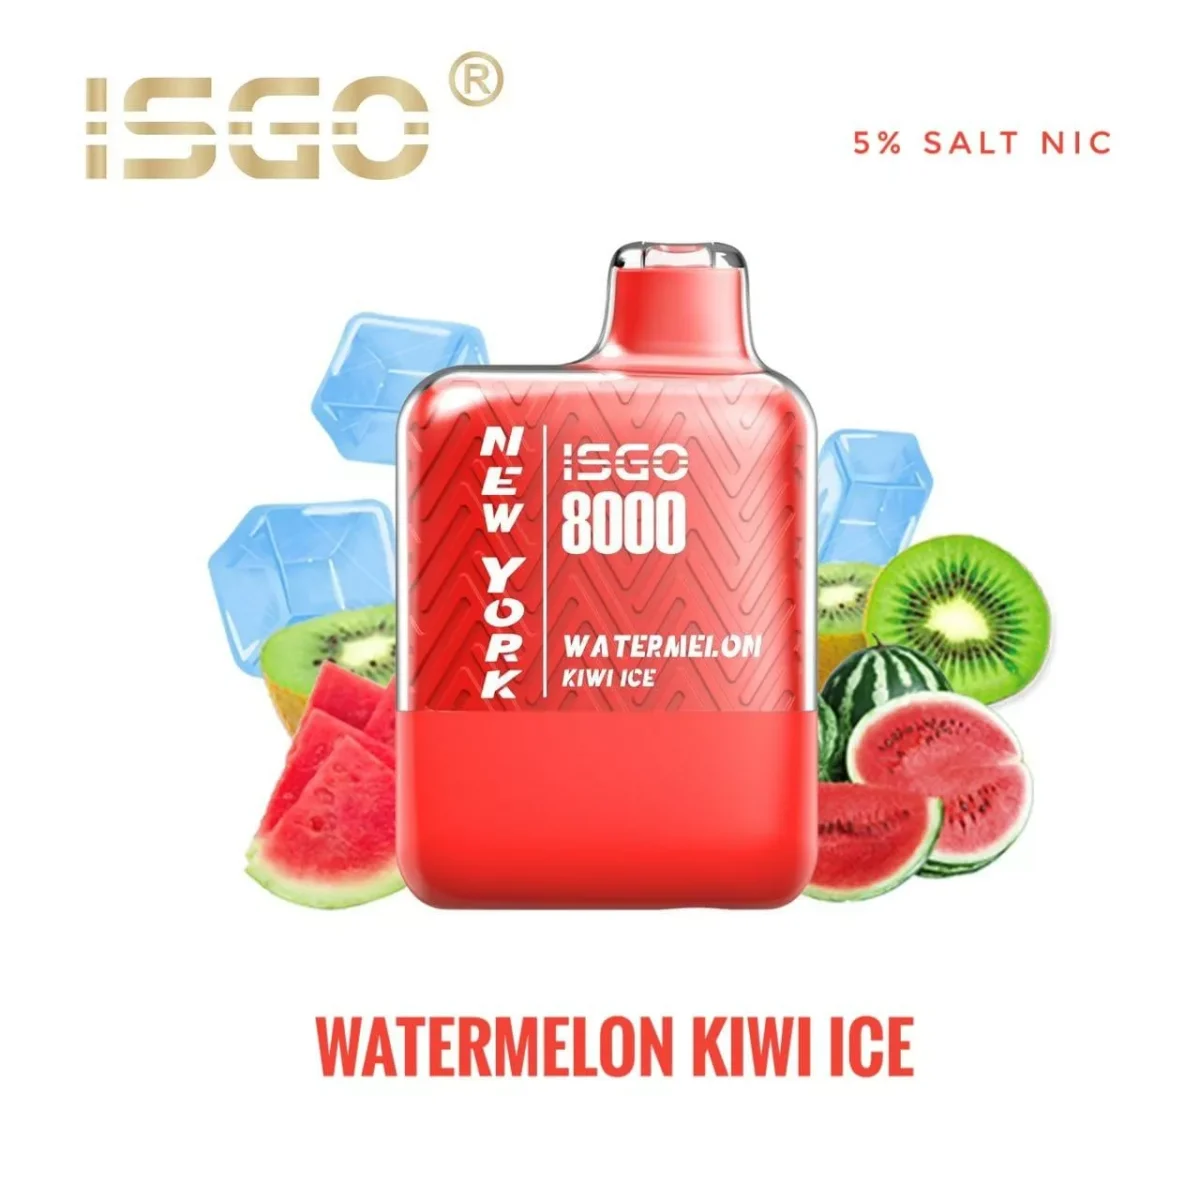 ISGO New York 8000 Disposable Puffs in UAE